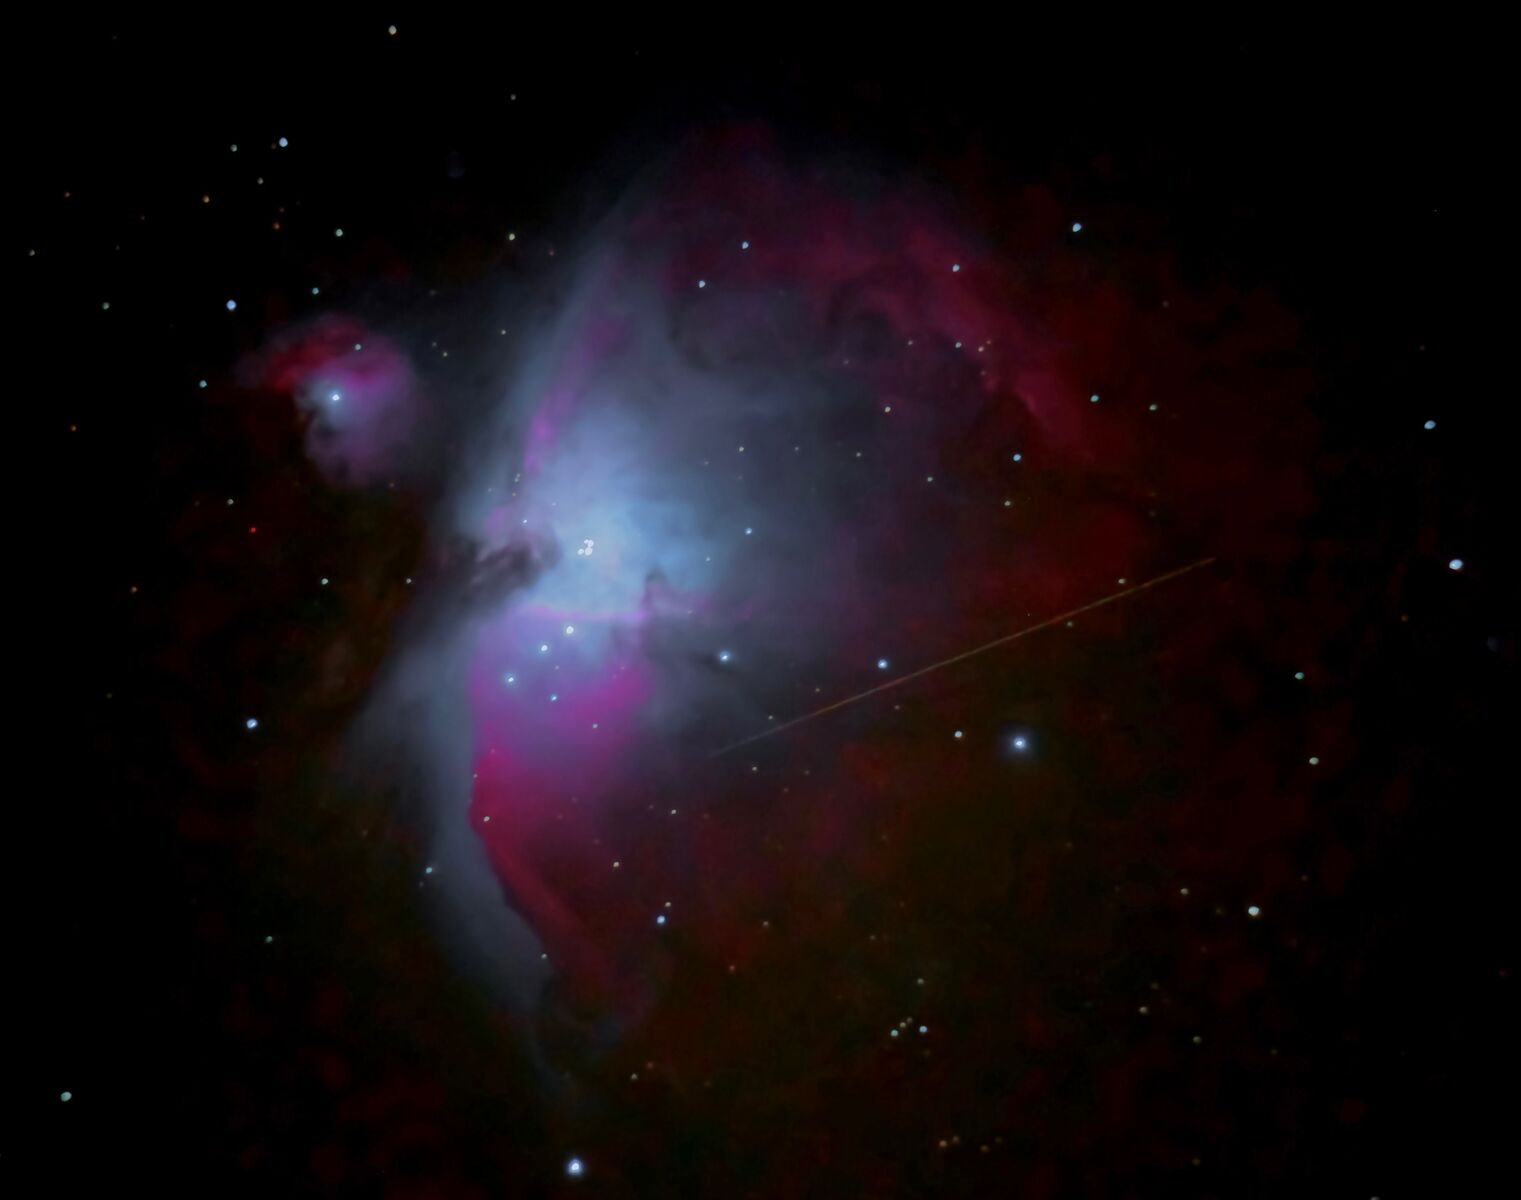 The Orion Nebula with either a meteor or a satellite streak